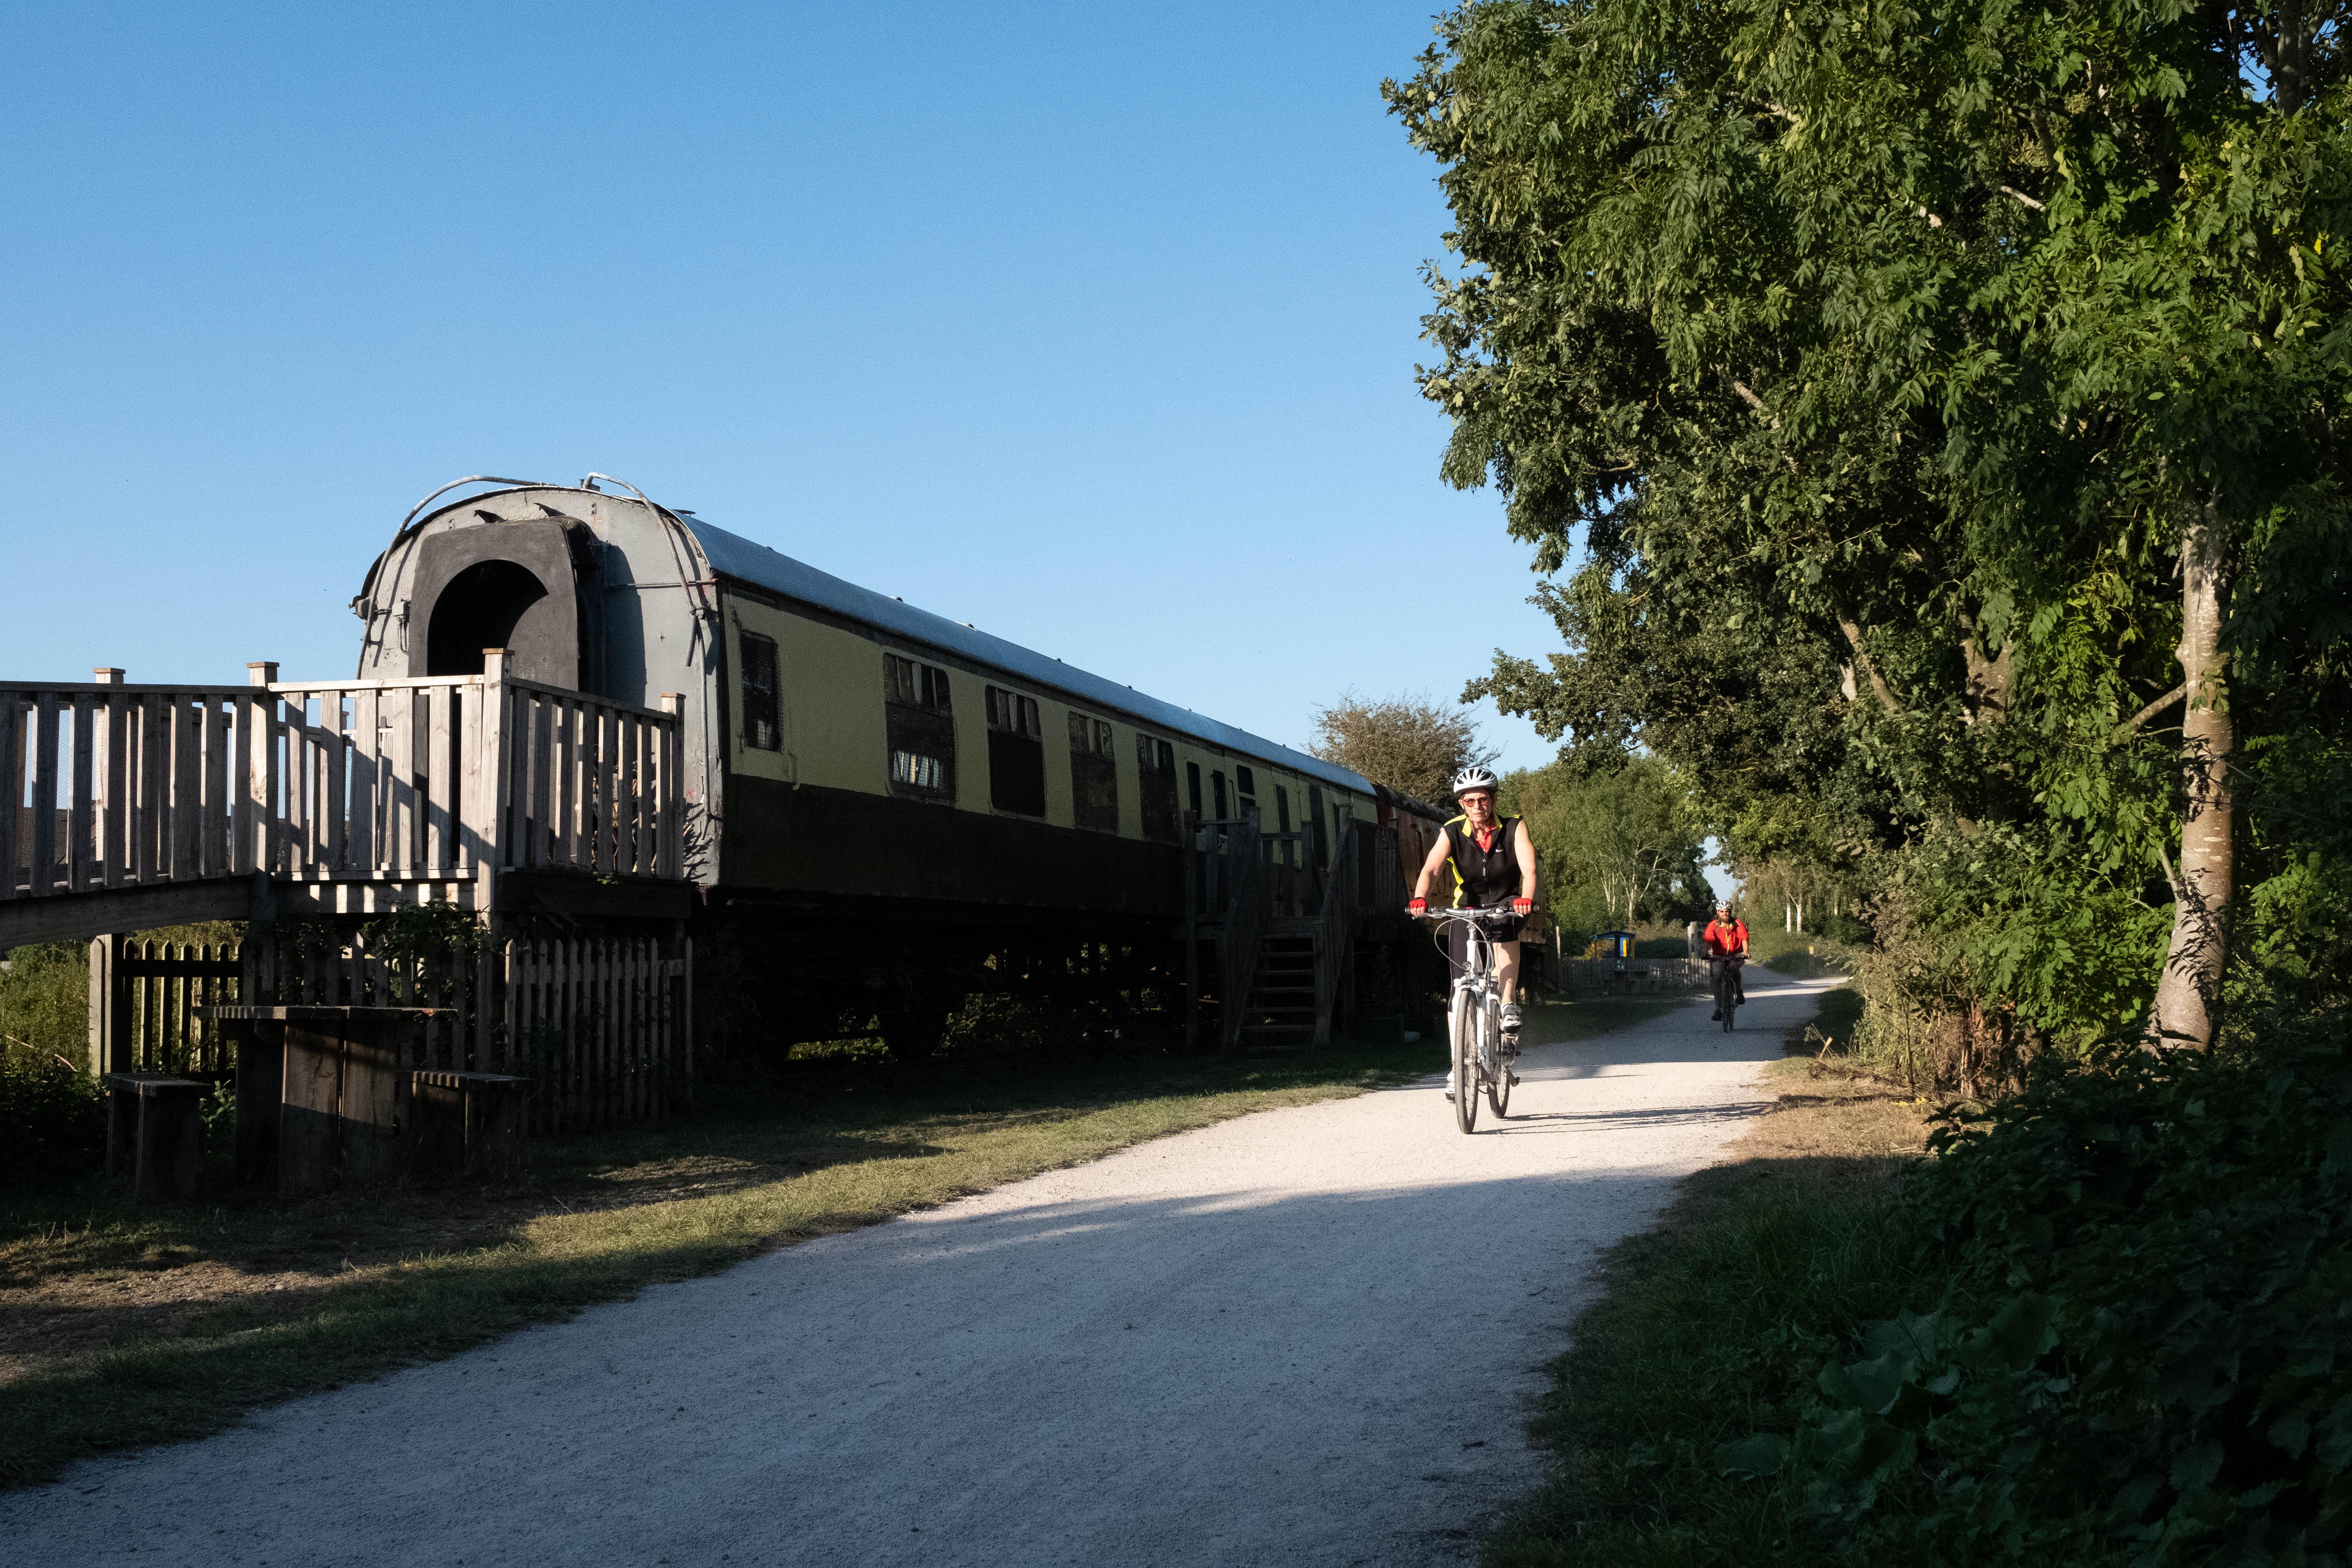 A pathway at Stratford Greenway. On the path, there is a cyclist heading towards the camera man. On the side of the path is an old railway carriage.